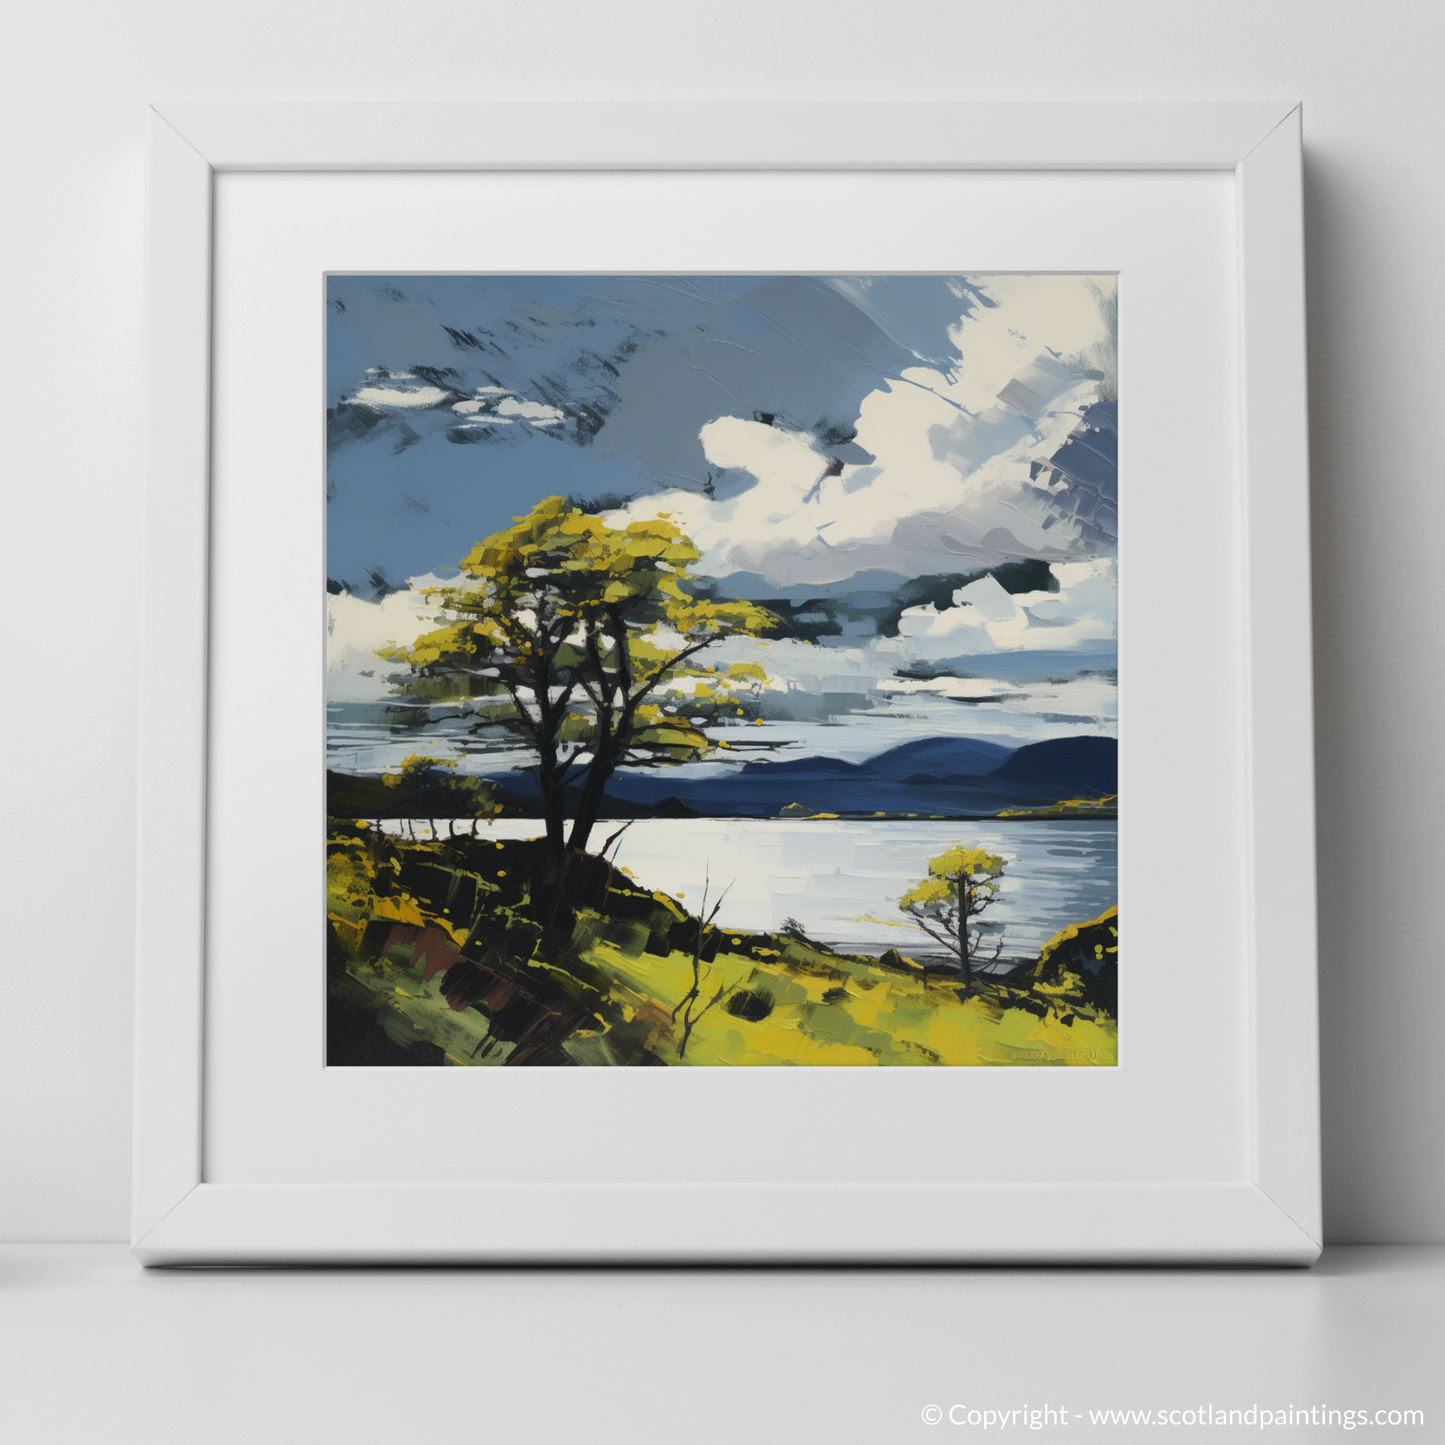 Art Print of Loch Lomond in summer with a white frame